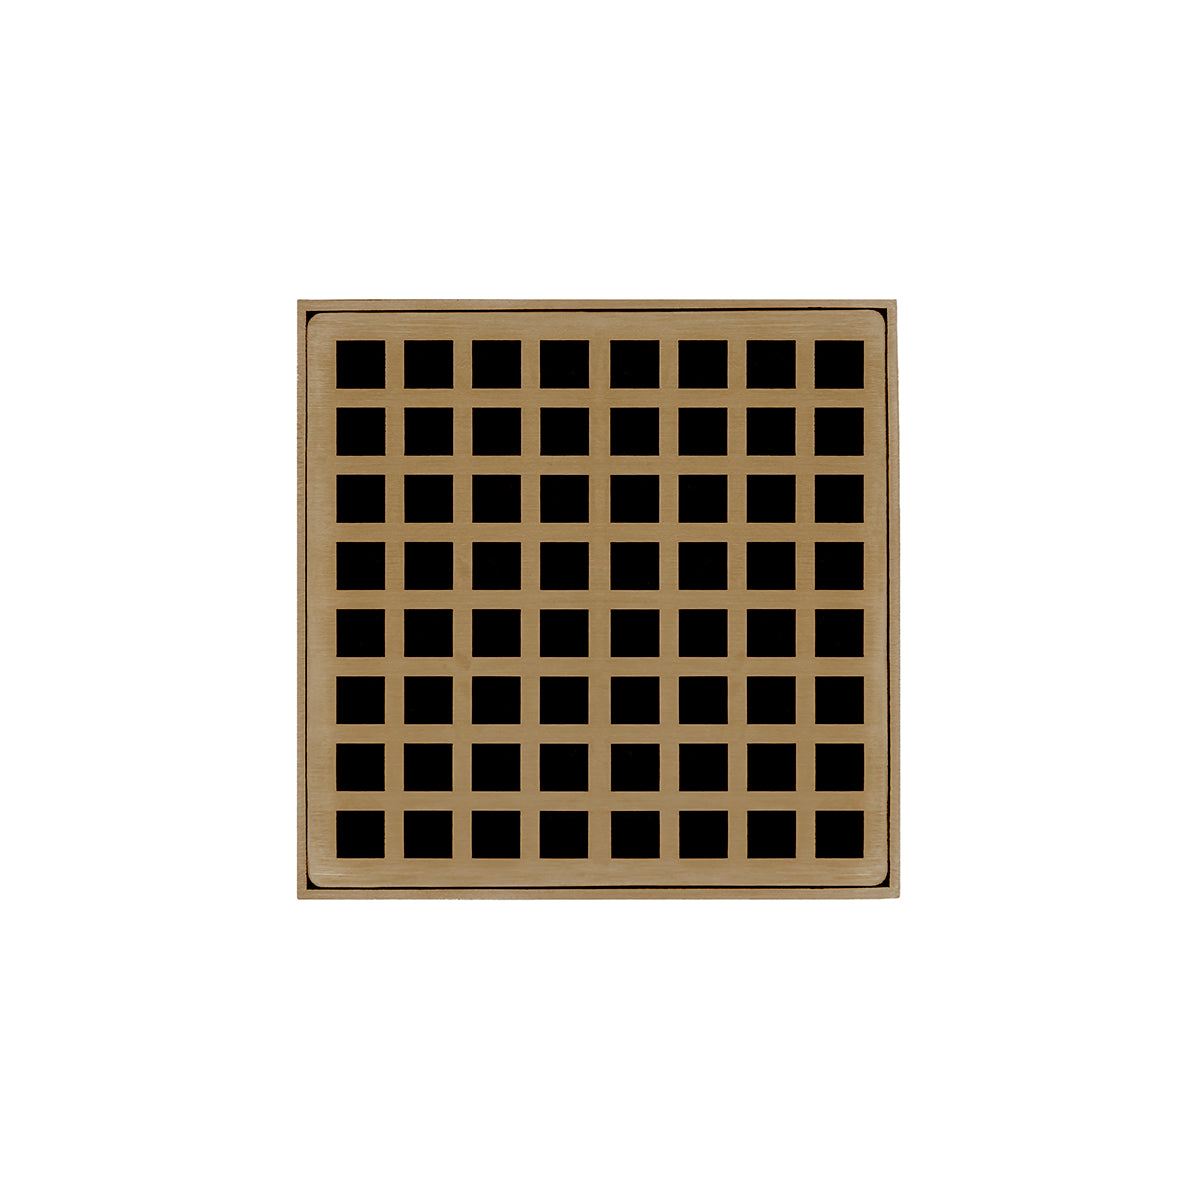 Infinity Drain 5" x 5" QDB 5 Premium Center Drain Kit with Squares Pattern Decorative Plate with Stainless Steel Bonded Flange Drain Body, 2" No Hub Outlet